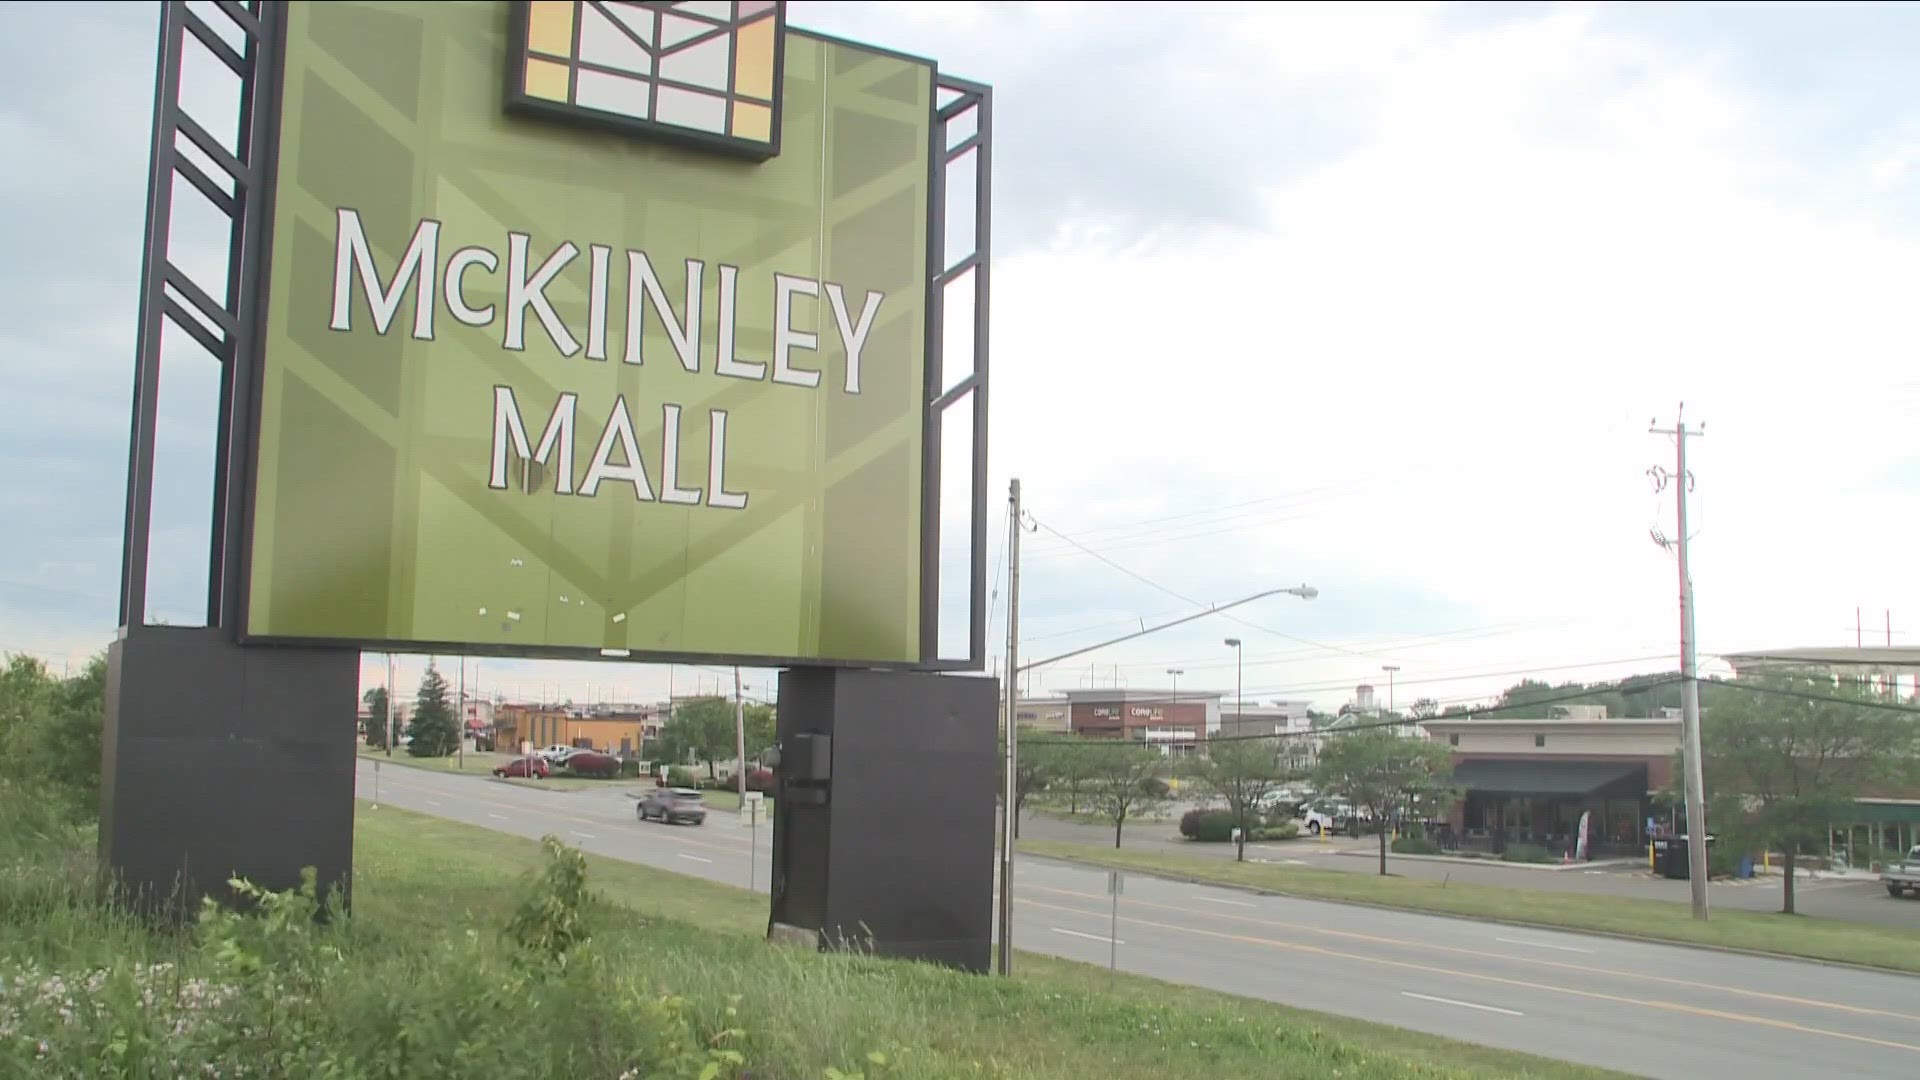 The McKinley Mall online auction ended on Wednesday afternoon with a high bid of $7.975 million. Bidding started at $3 million on Monday.